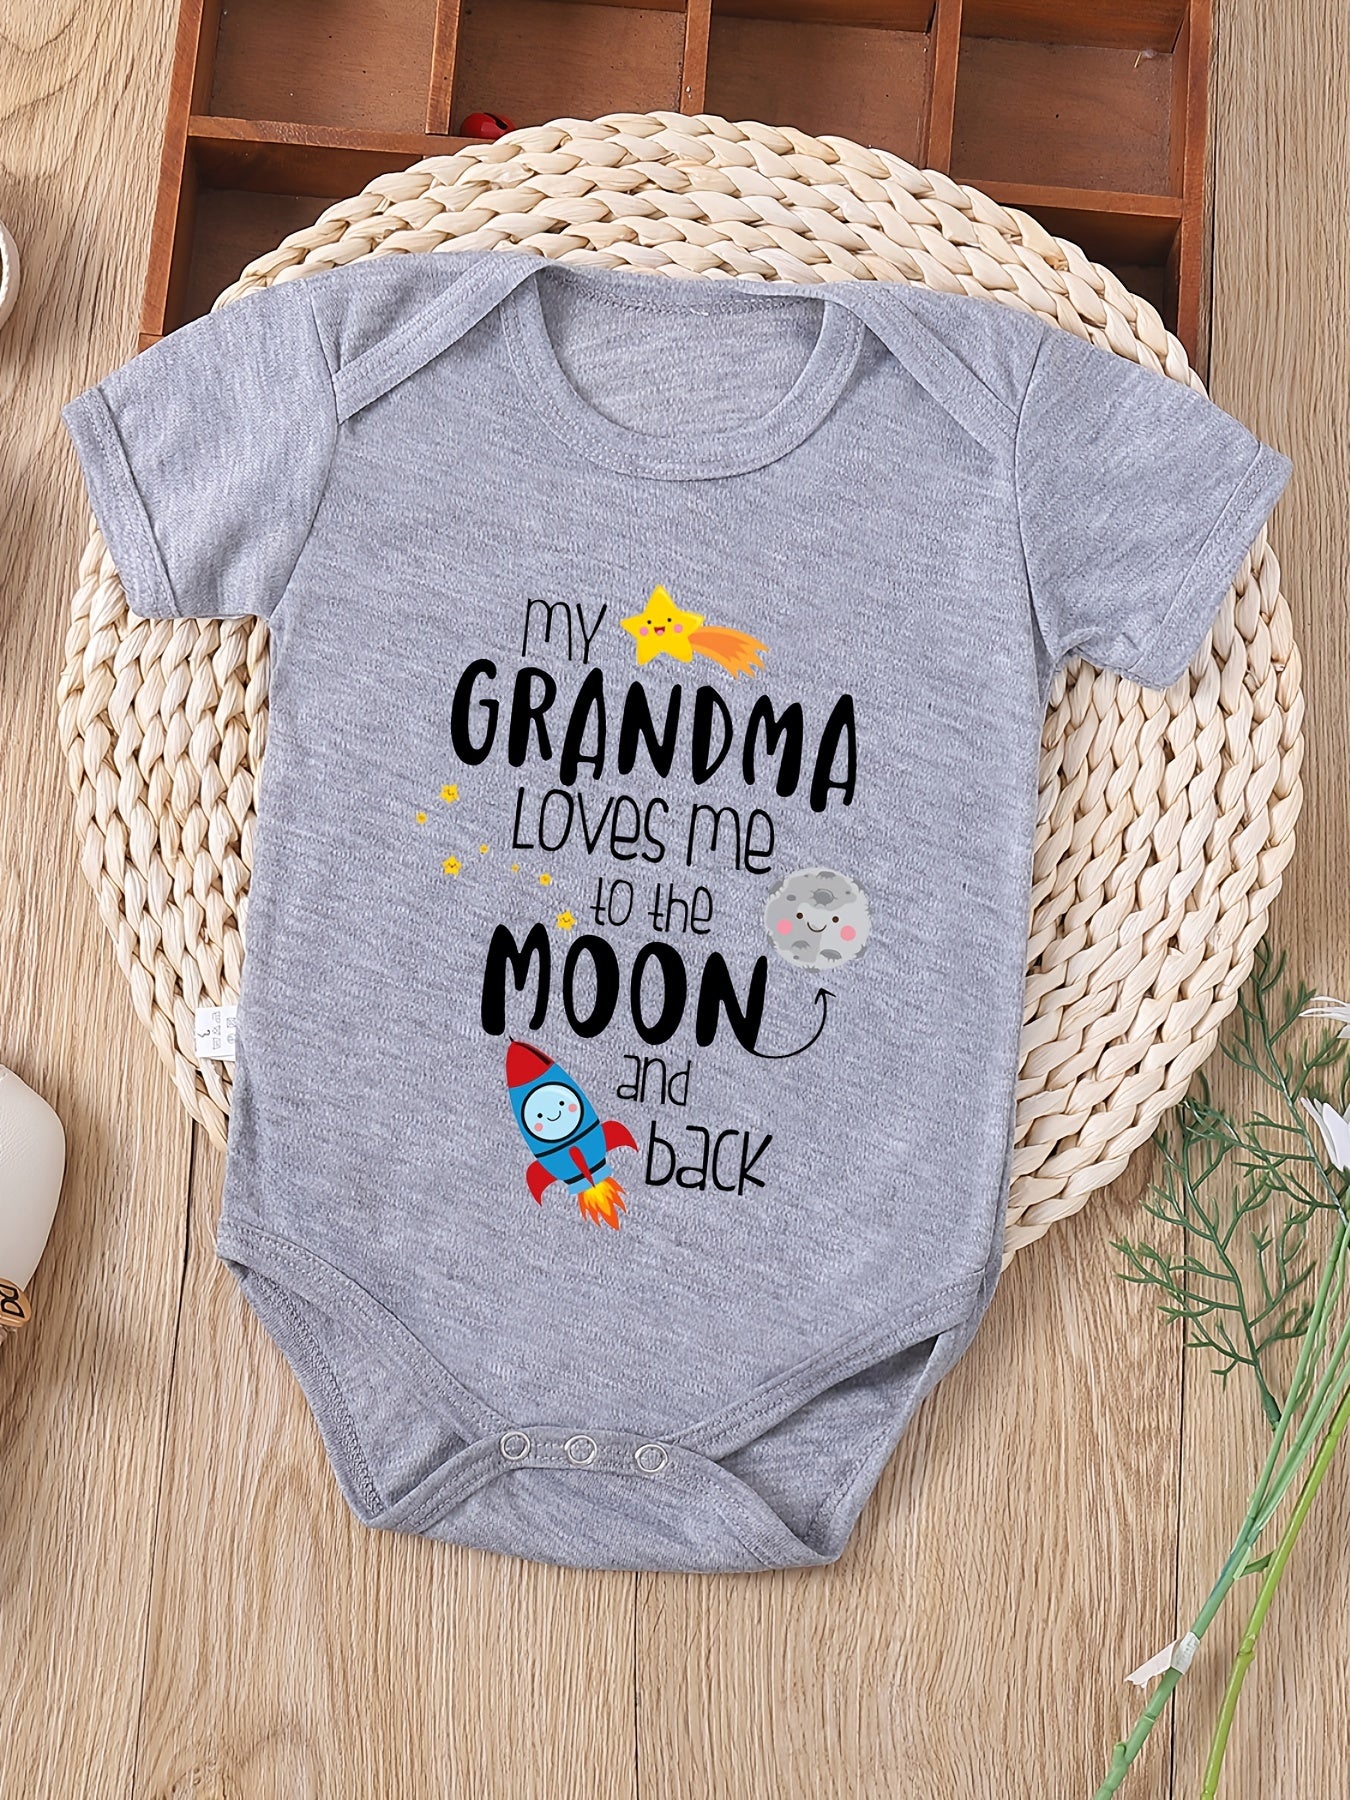 Baby Girls Cute Casual Romper With "My Grandma Loves Me To The Moon" Print For Summer Pregnancy Gift